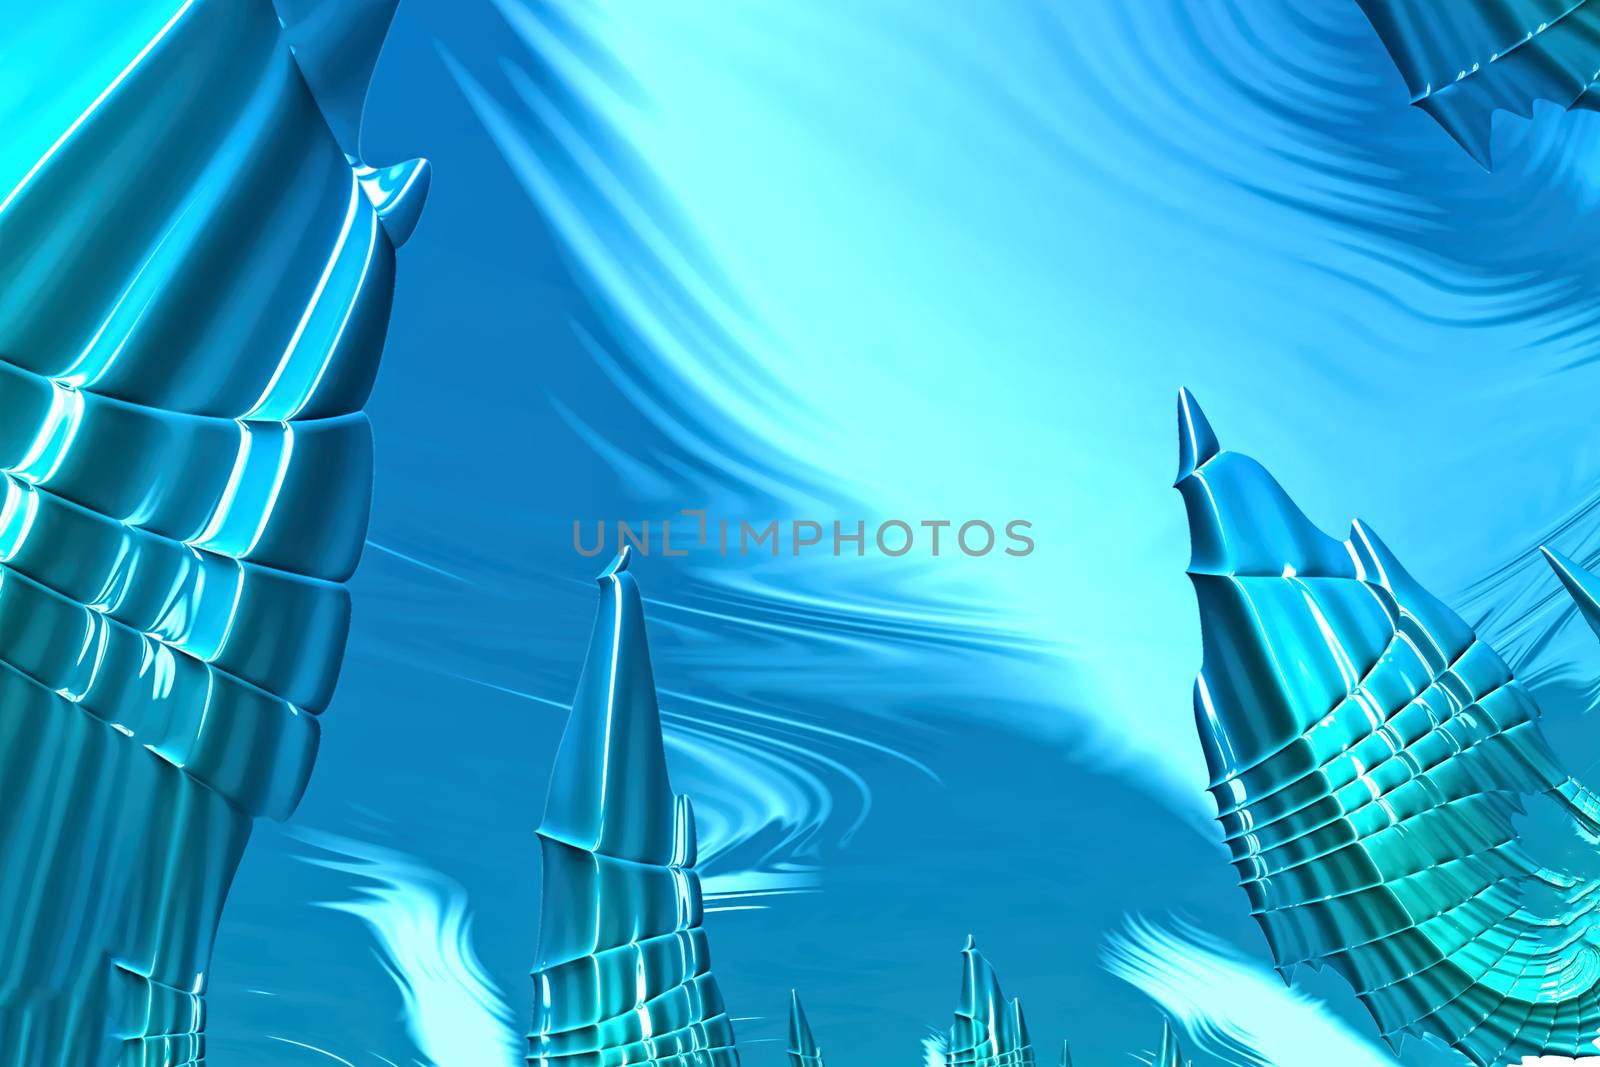 Fractal background: unusual view of the blue sky with mountain peaks or skyscrapers. Abstract computer-generated image.